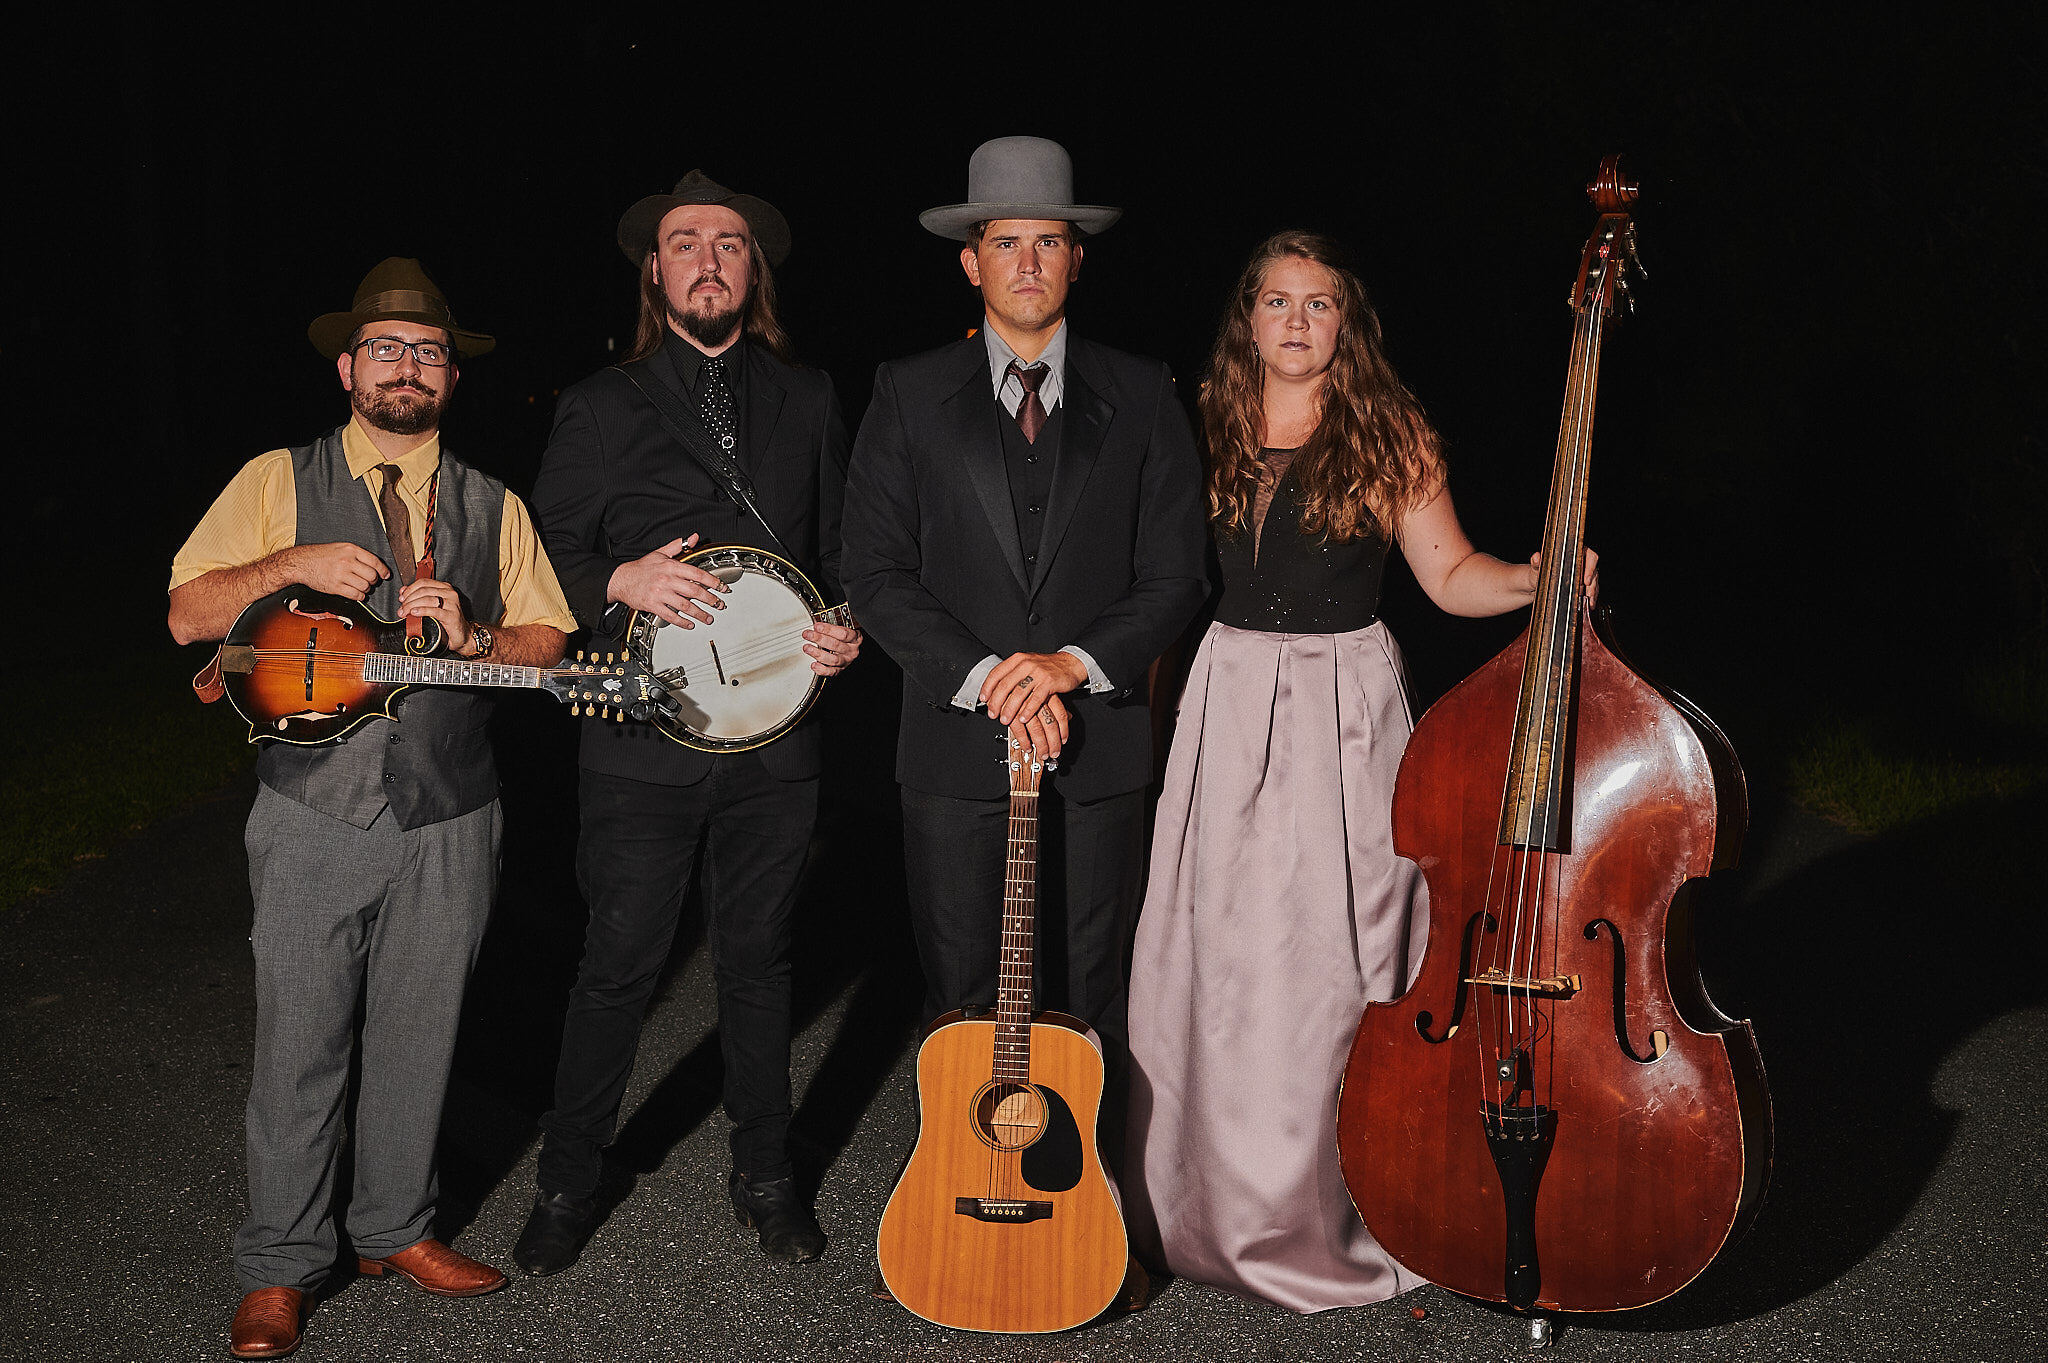 Four member bluegrass band Remedy Tree